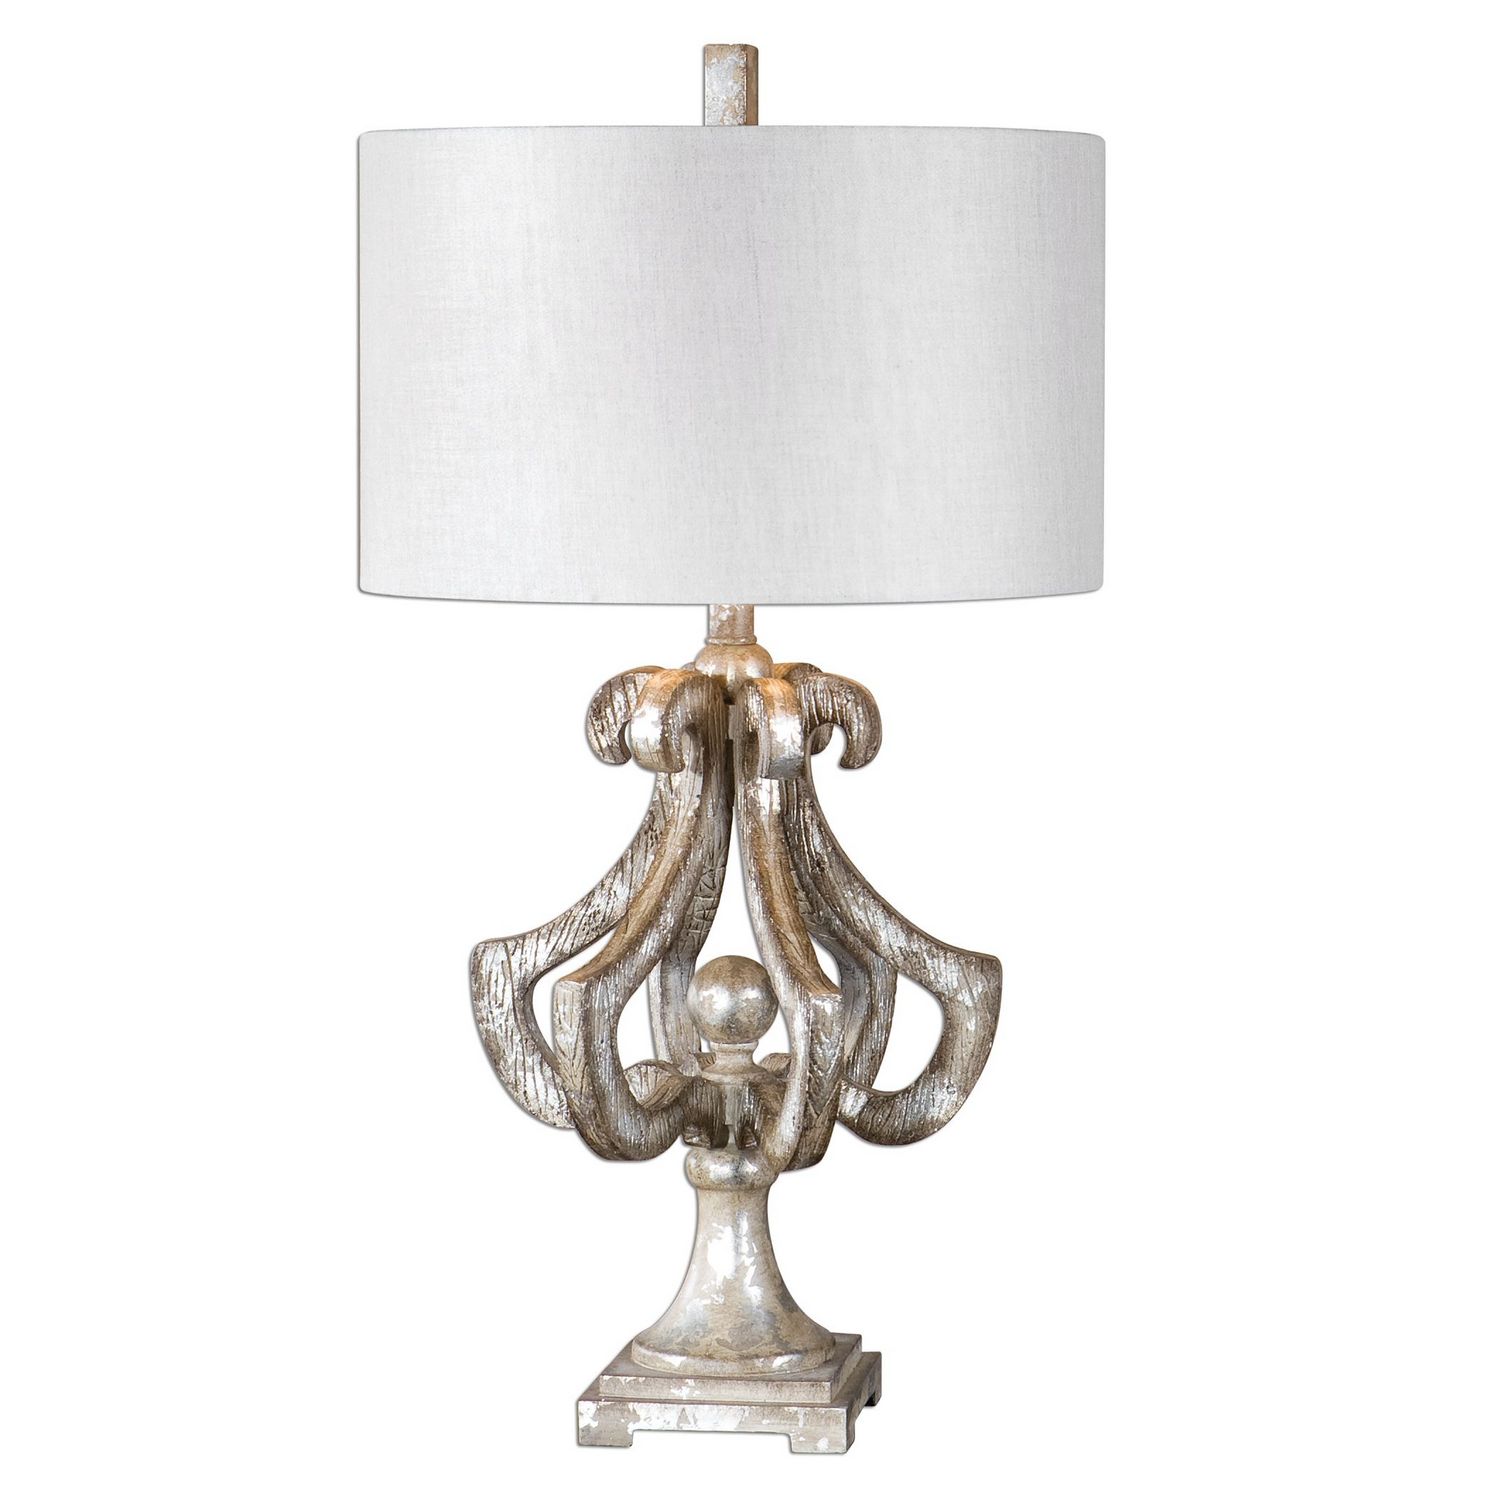 Uttermost Vinadio Table Lamp - Distressed Silver